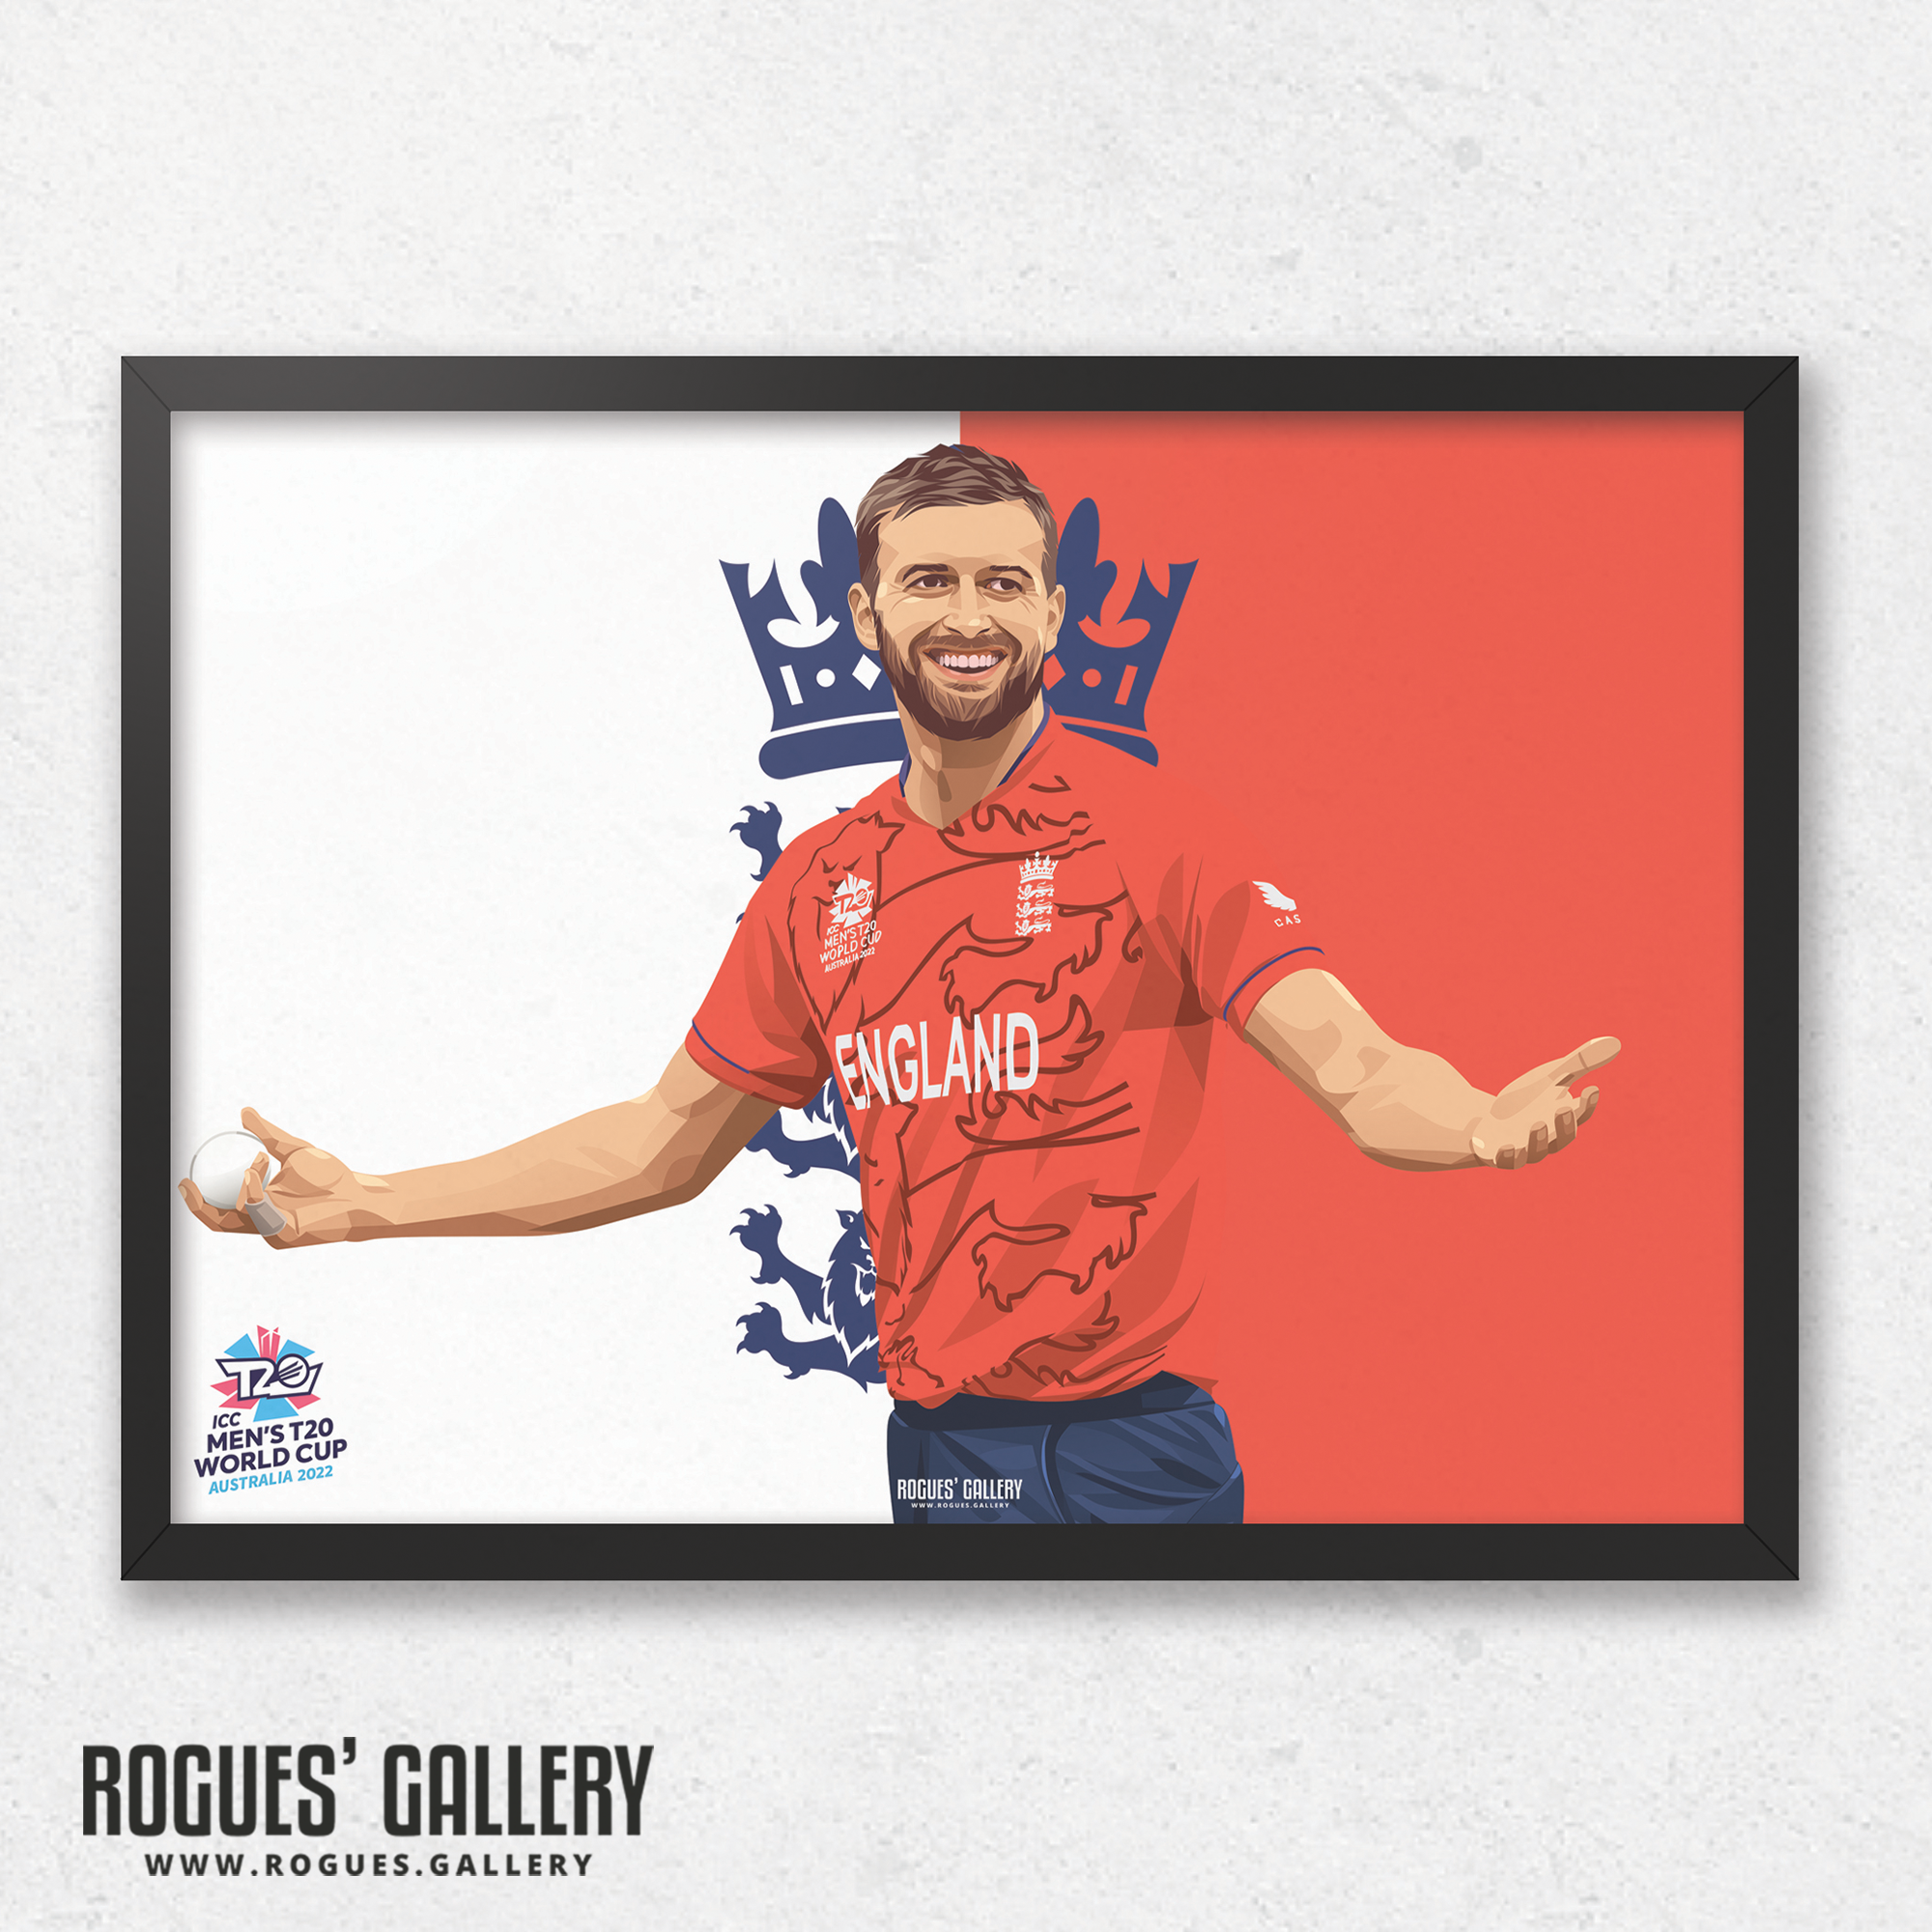 Mark Wood England cricketer T20 World Champion A3 print fast bowler